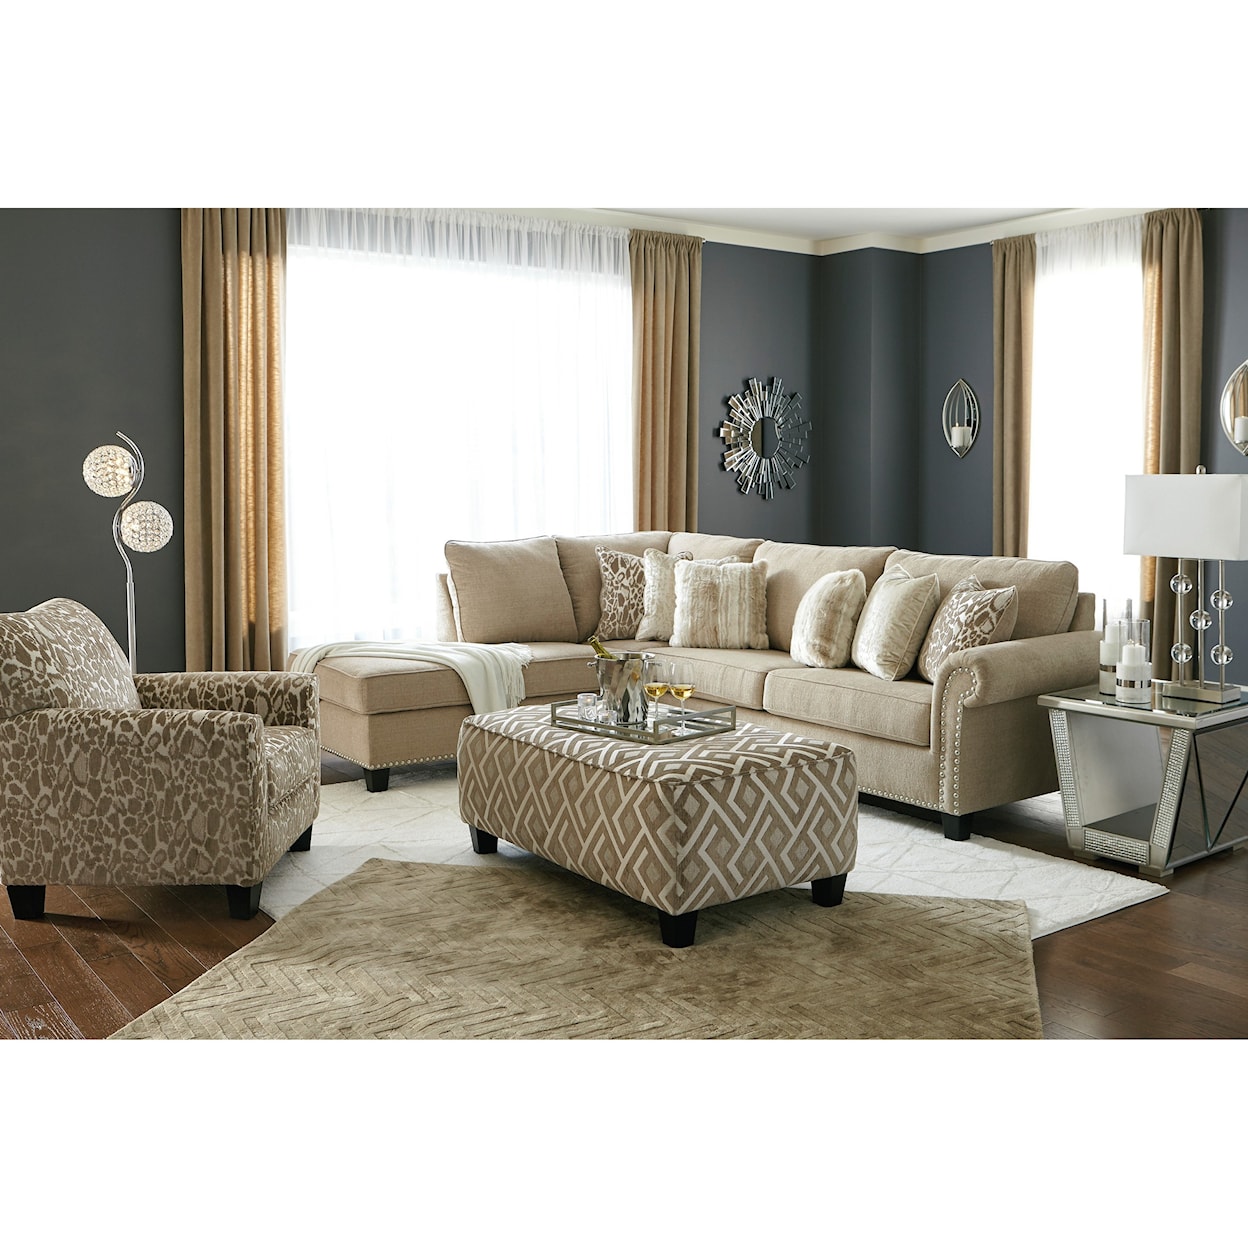 Signature Dovemont Living Room Group